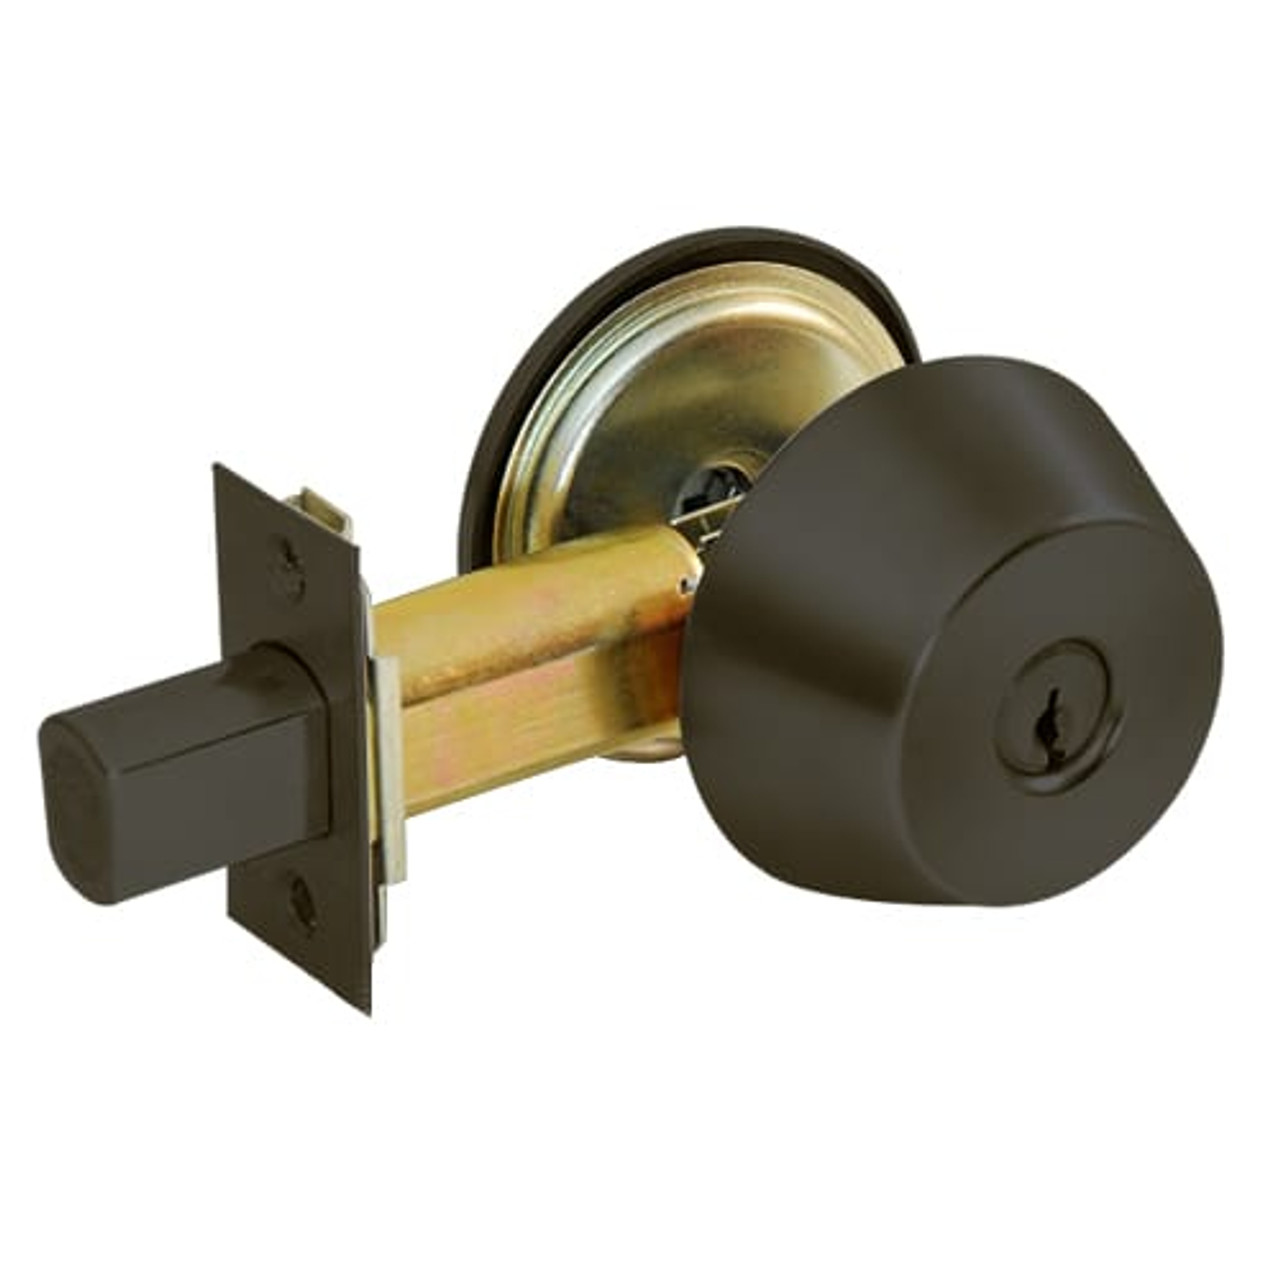 DL2212-613 Corbin DL2200 Series Cylindrical Deadlocks with Double Cylinder in Oil Rubbed Bronze Finish